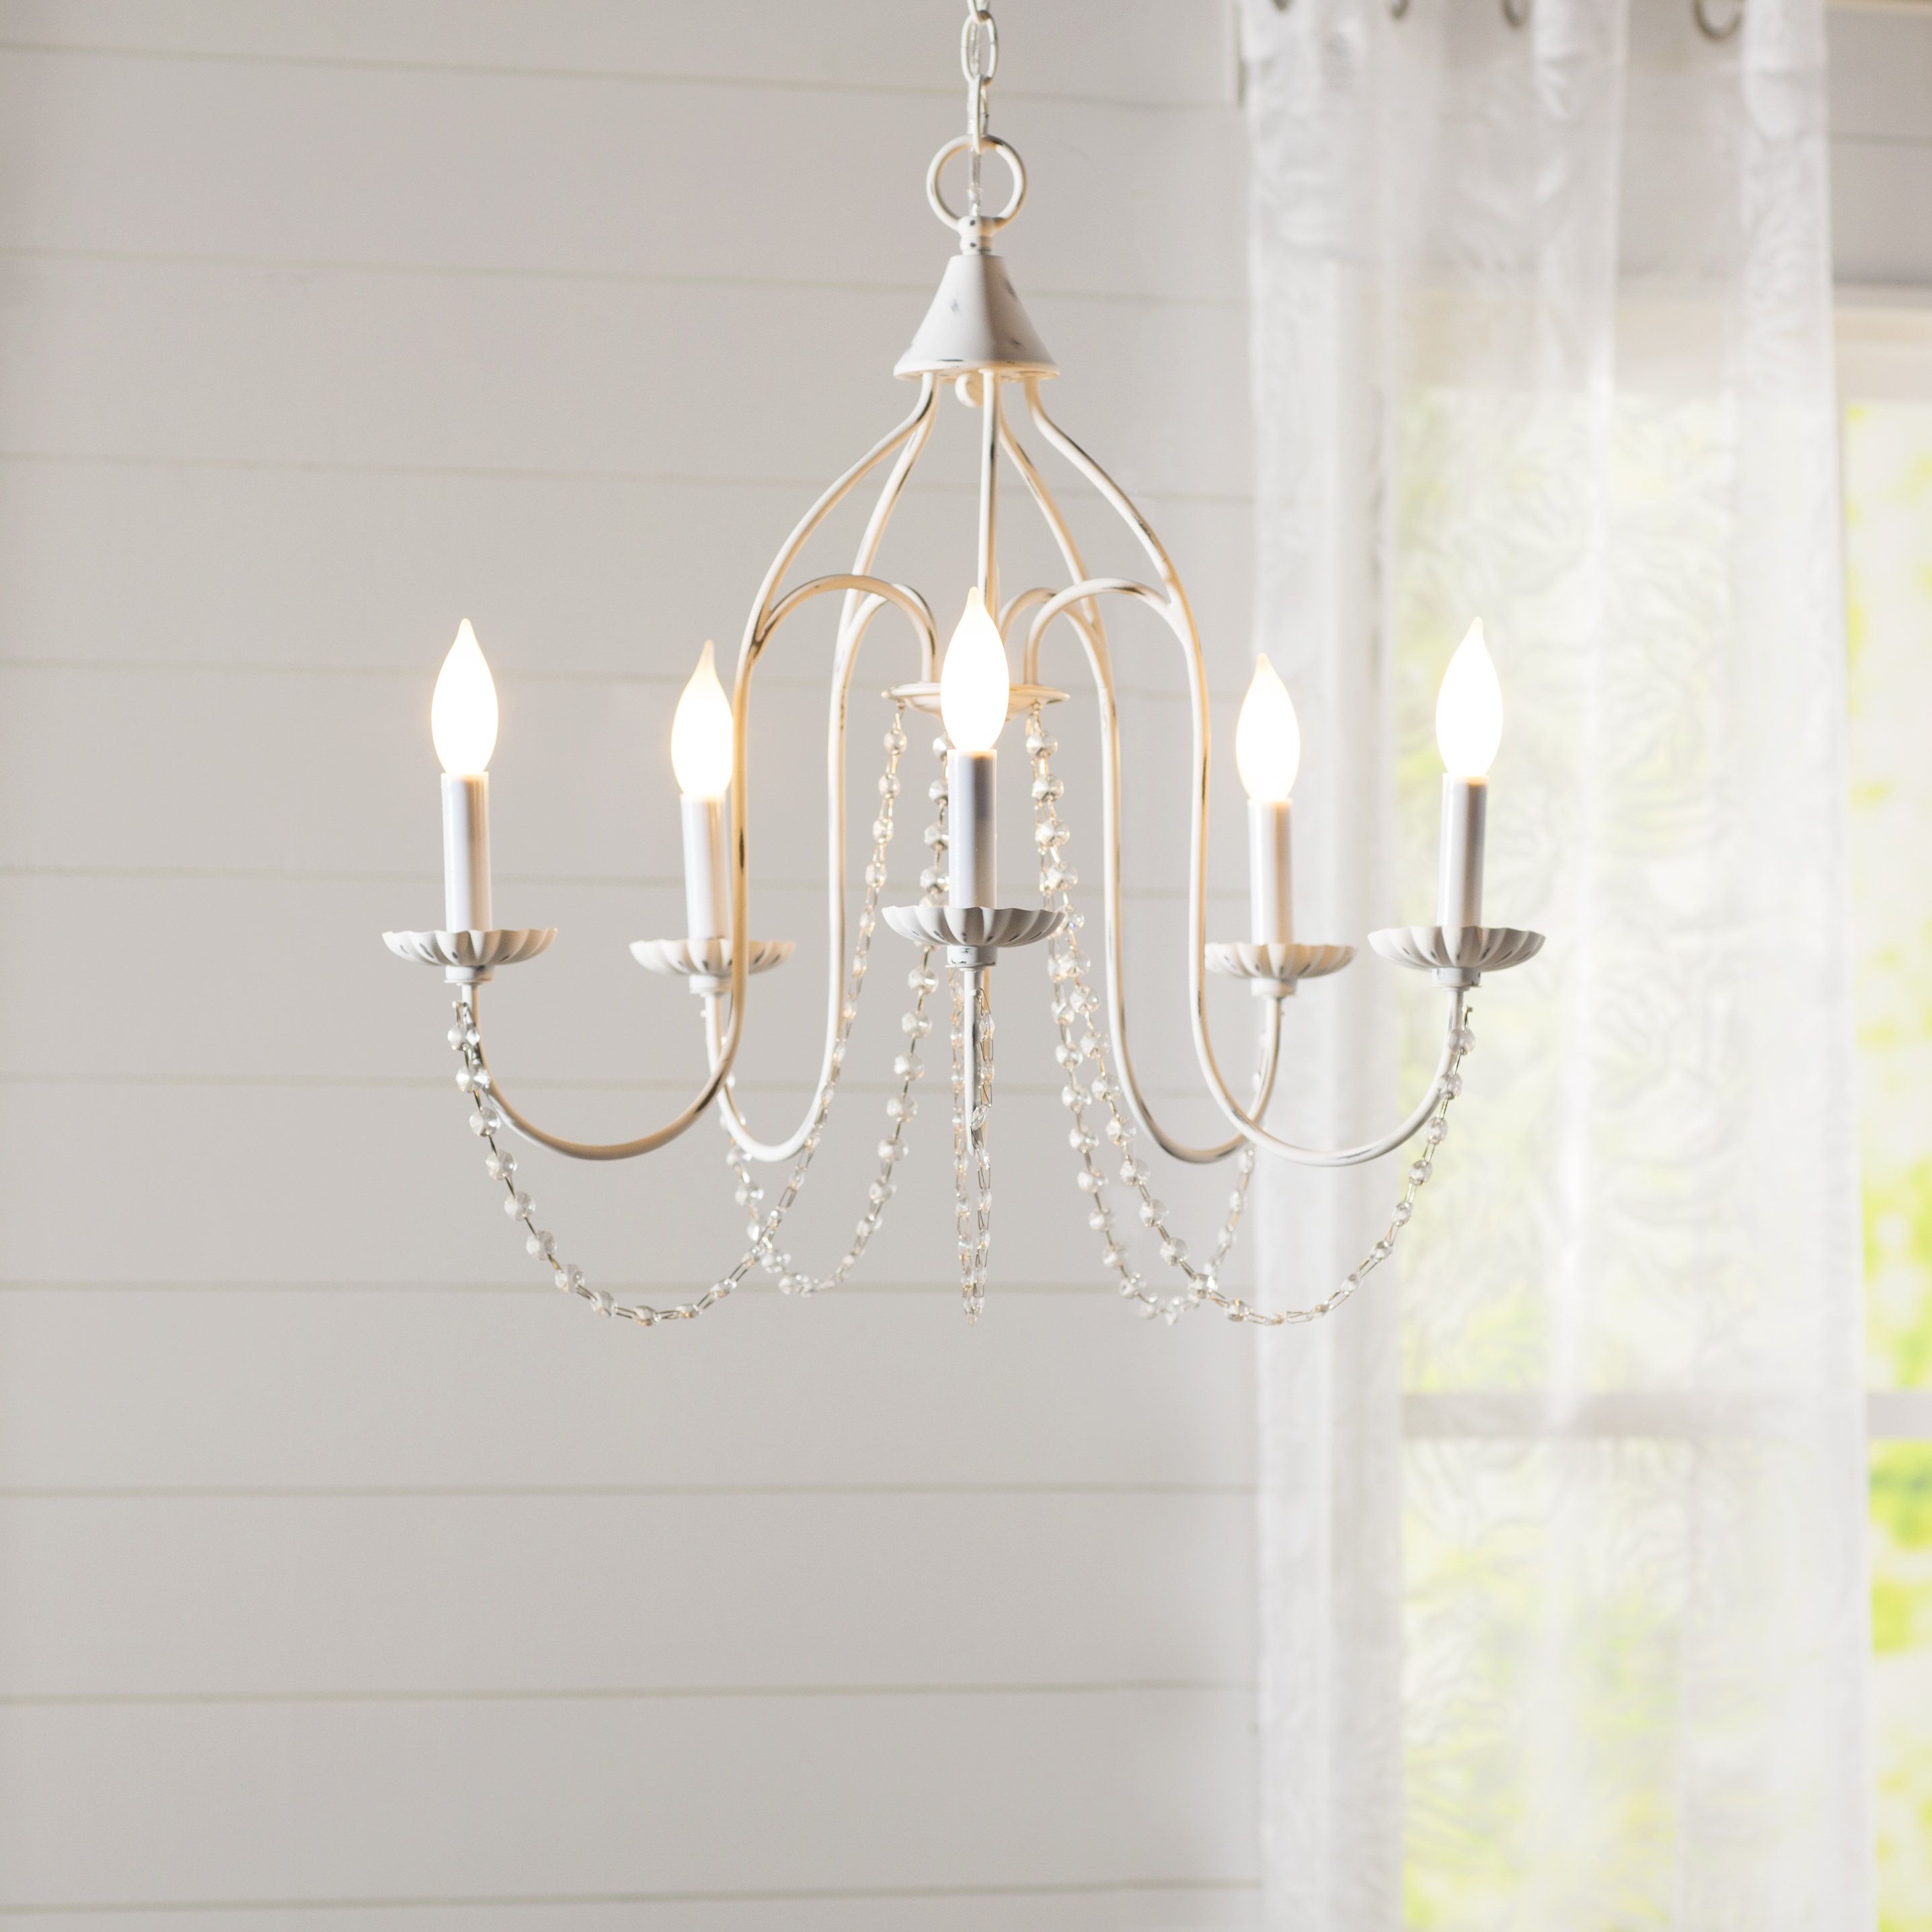 Florentina 5 Light Candle Style Chandelier For Blanchette 5 Light Candle Style Chandeliers (View 7 of 30)